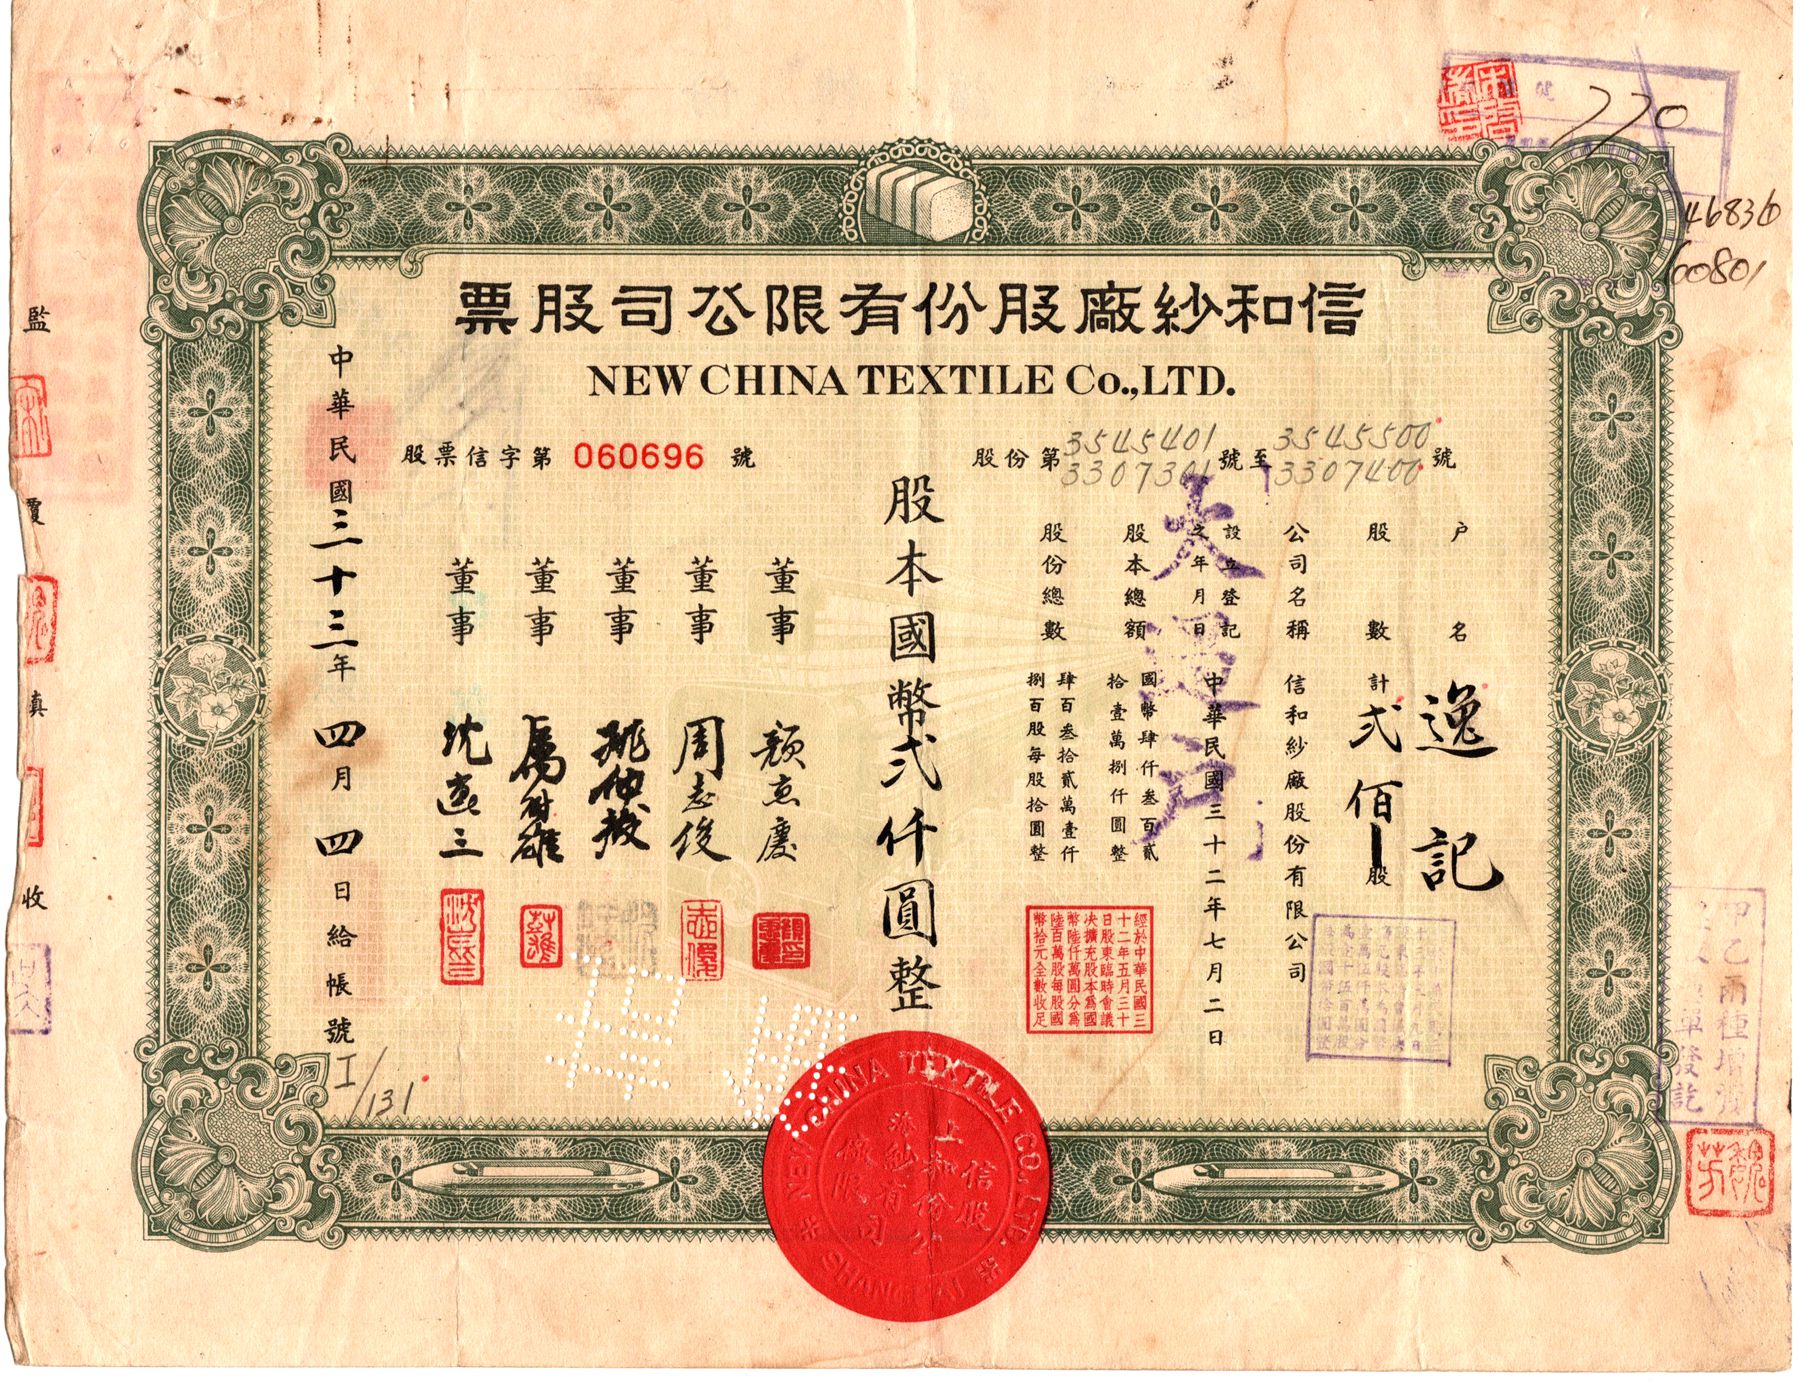 S1202, New China Textile Co. Stock Certificate of 1943 (Under 100 Shares)